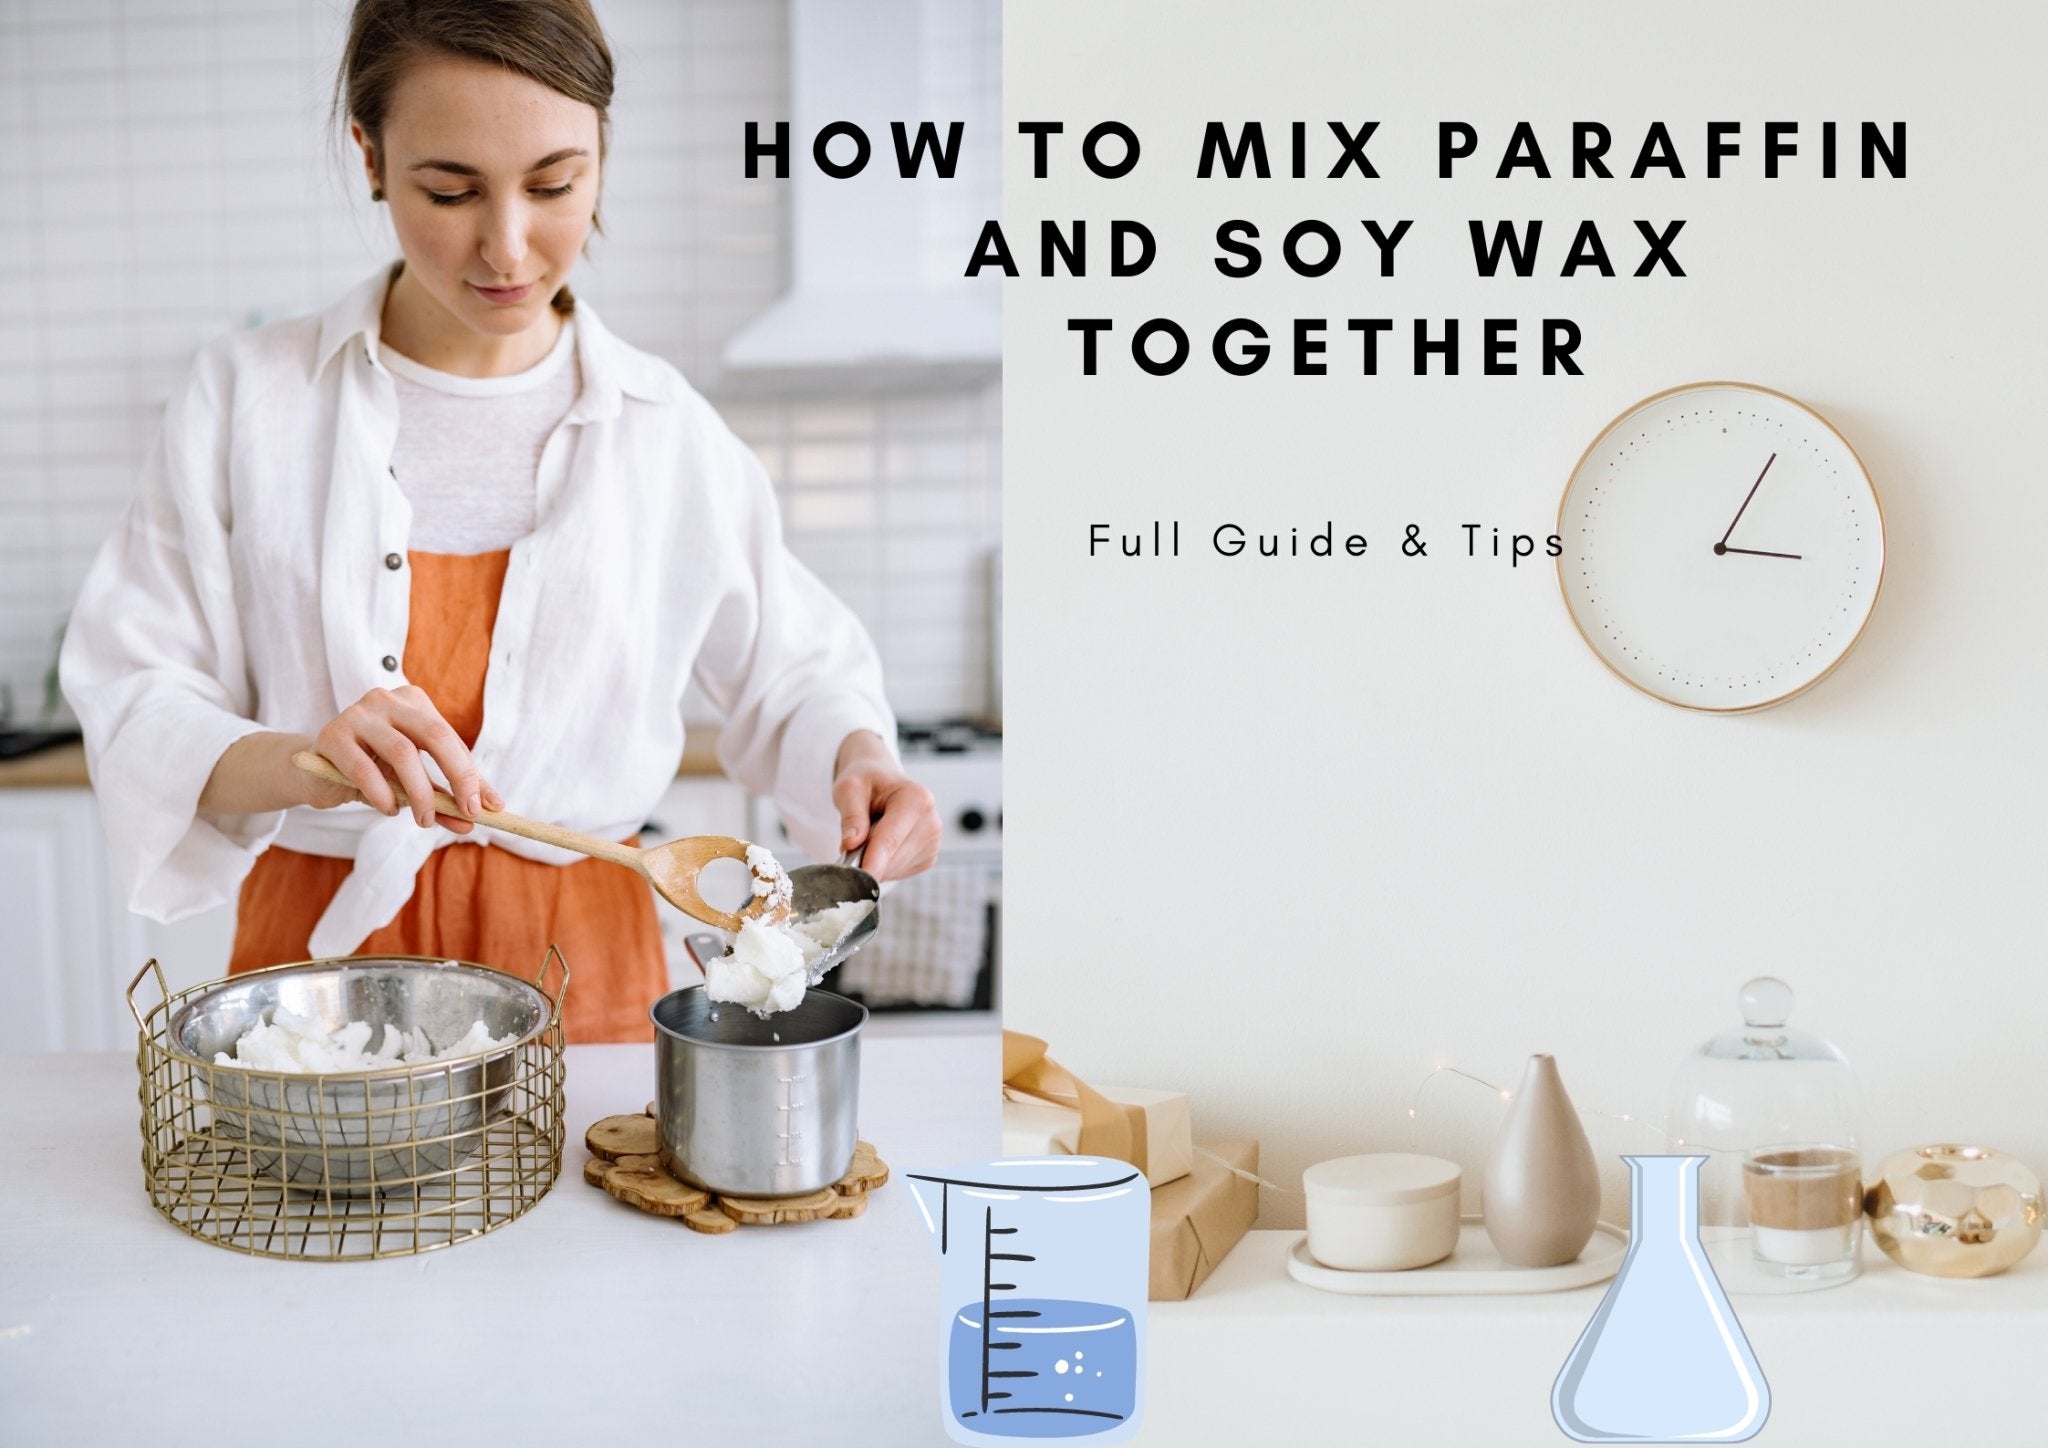 How to mix paraffin and soy wax together